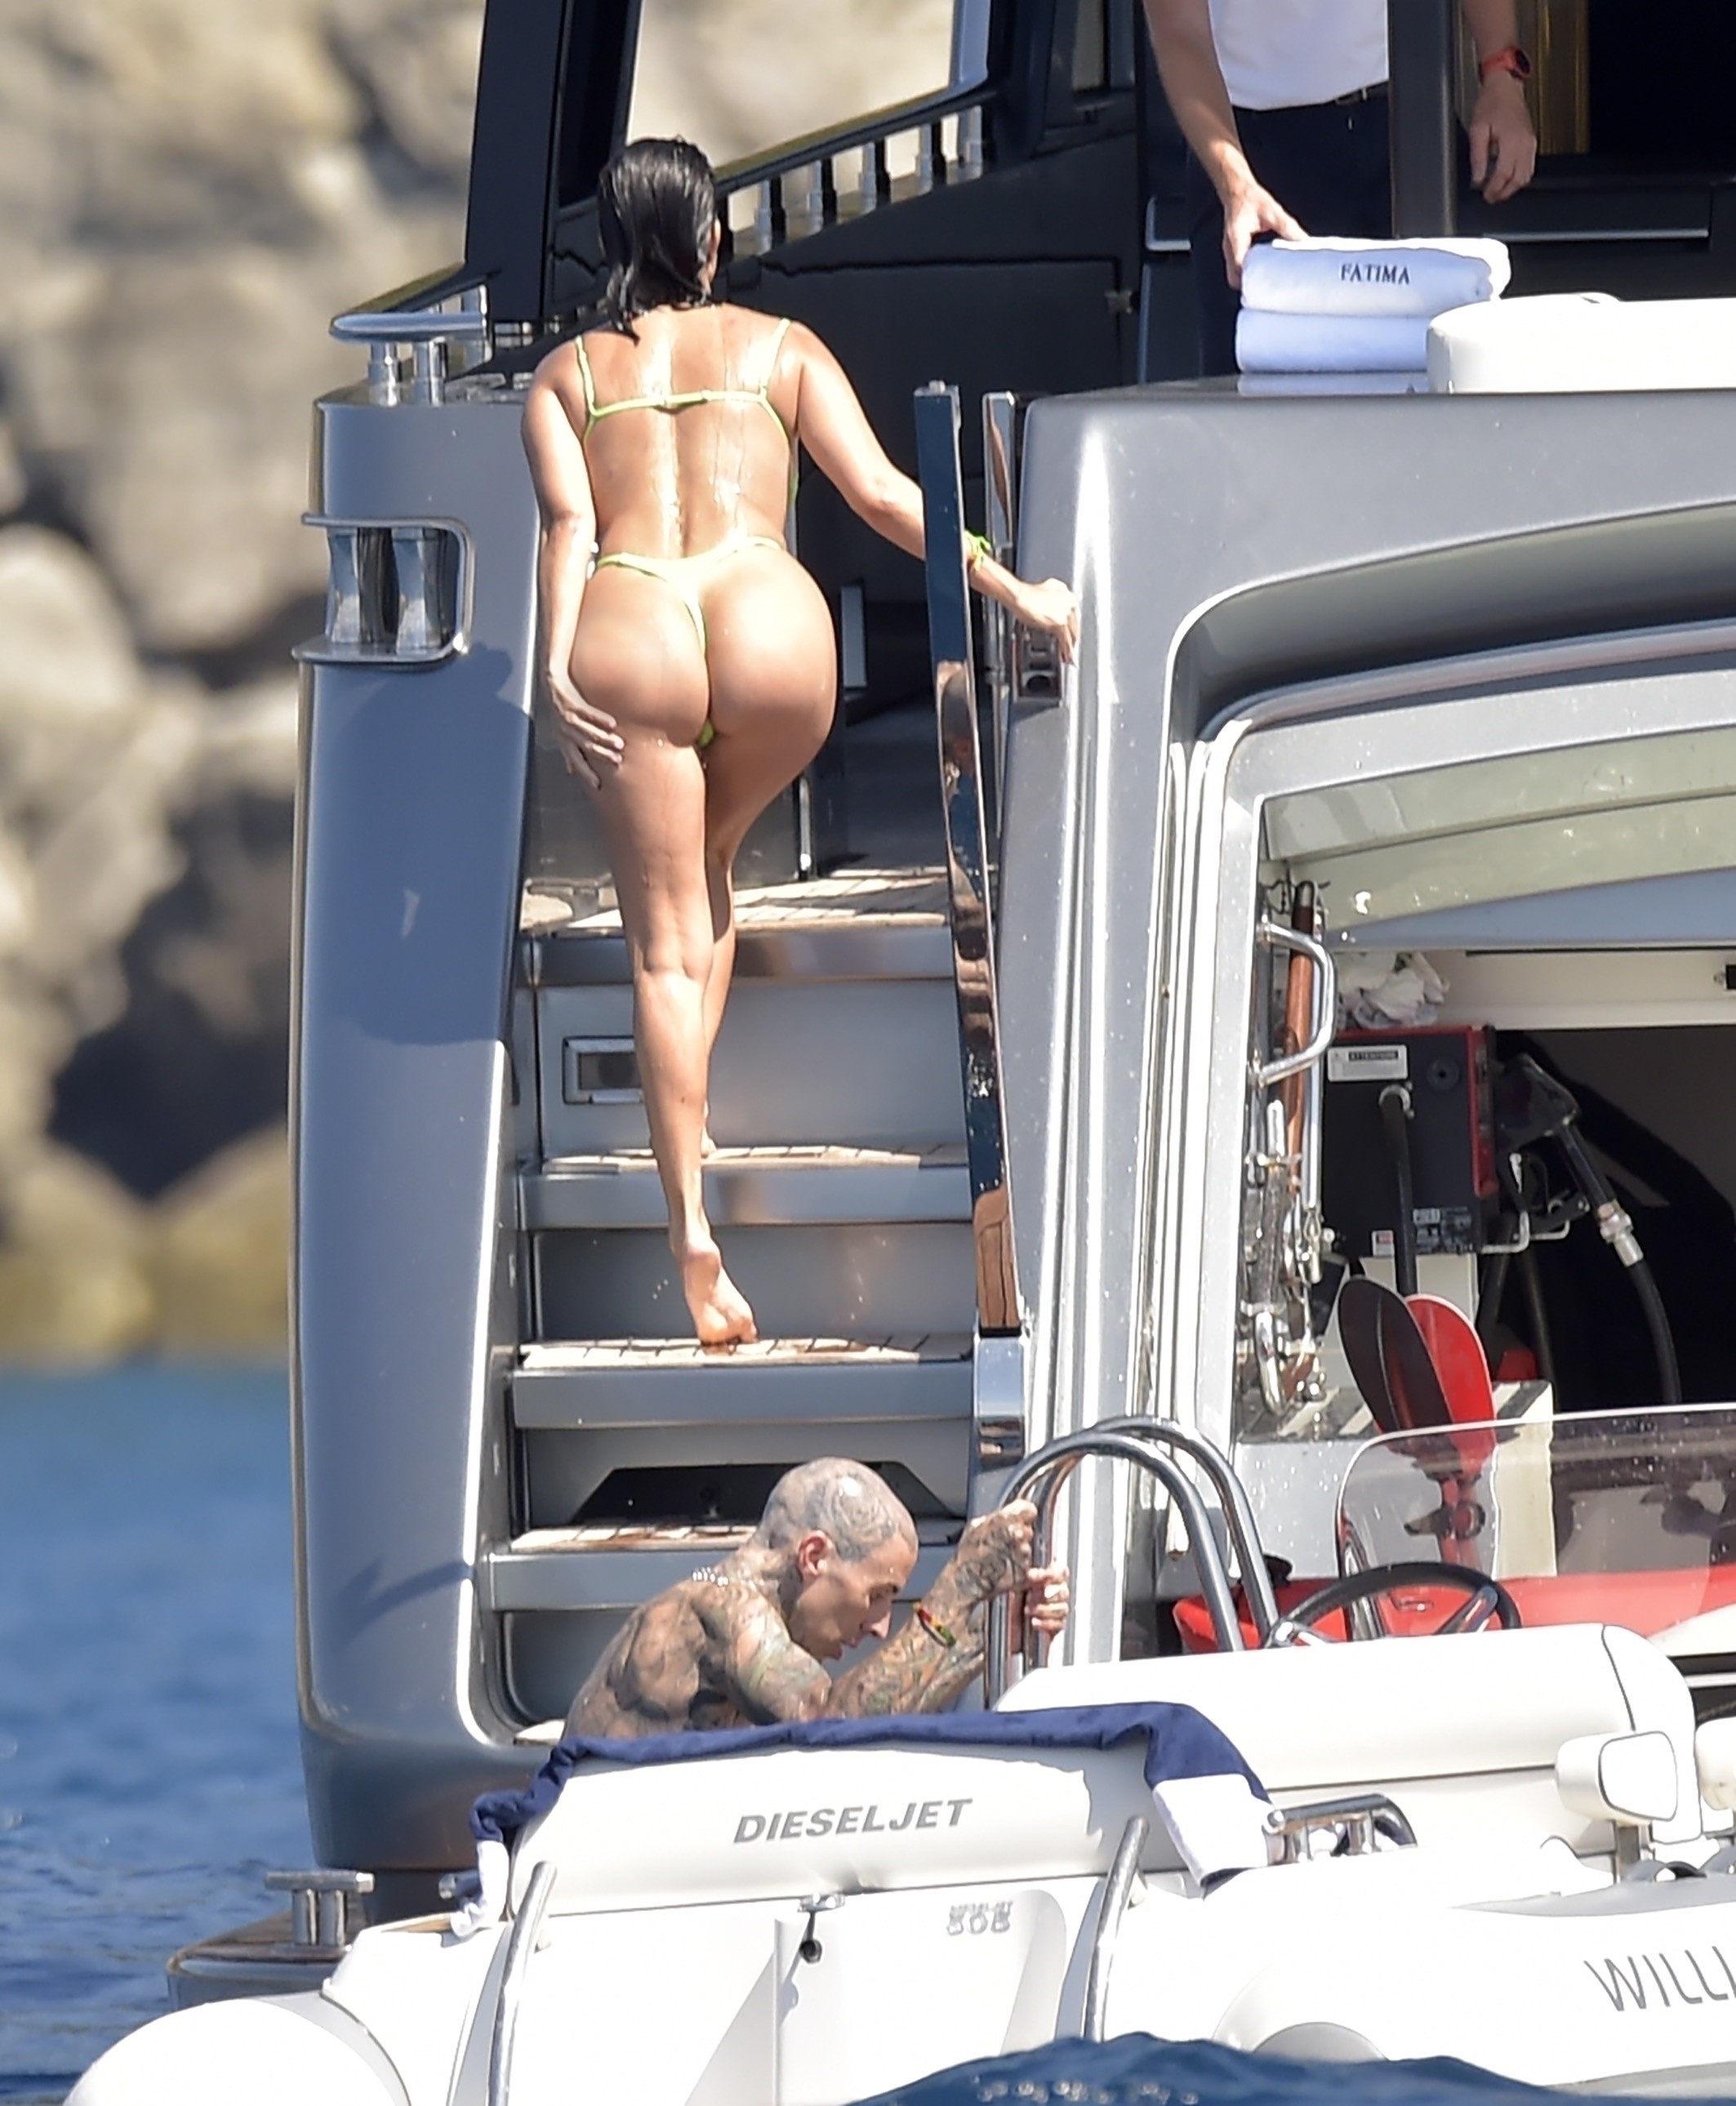 Photo © 2021 Backgrid UK/The Grosby GroupEXCLUSIVE PORTOFINO, ITALY  - 31 AUGUST 2021 Kourtney Kardashian and her boyfriend Travis Barker continue their passionate Italian getaway.  The loved up couple enjoyed a day out on a yacht around Sestri Leva (Foto: Backgrid UK/The Grosby Group)